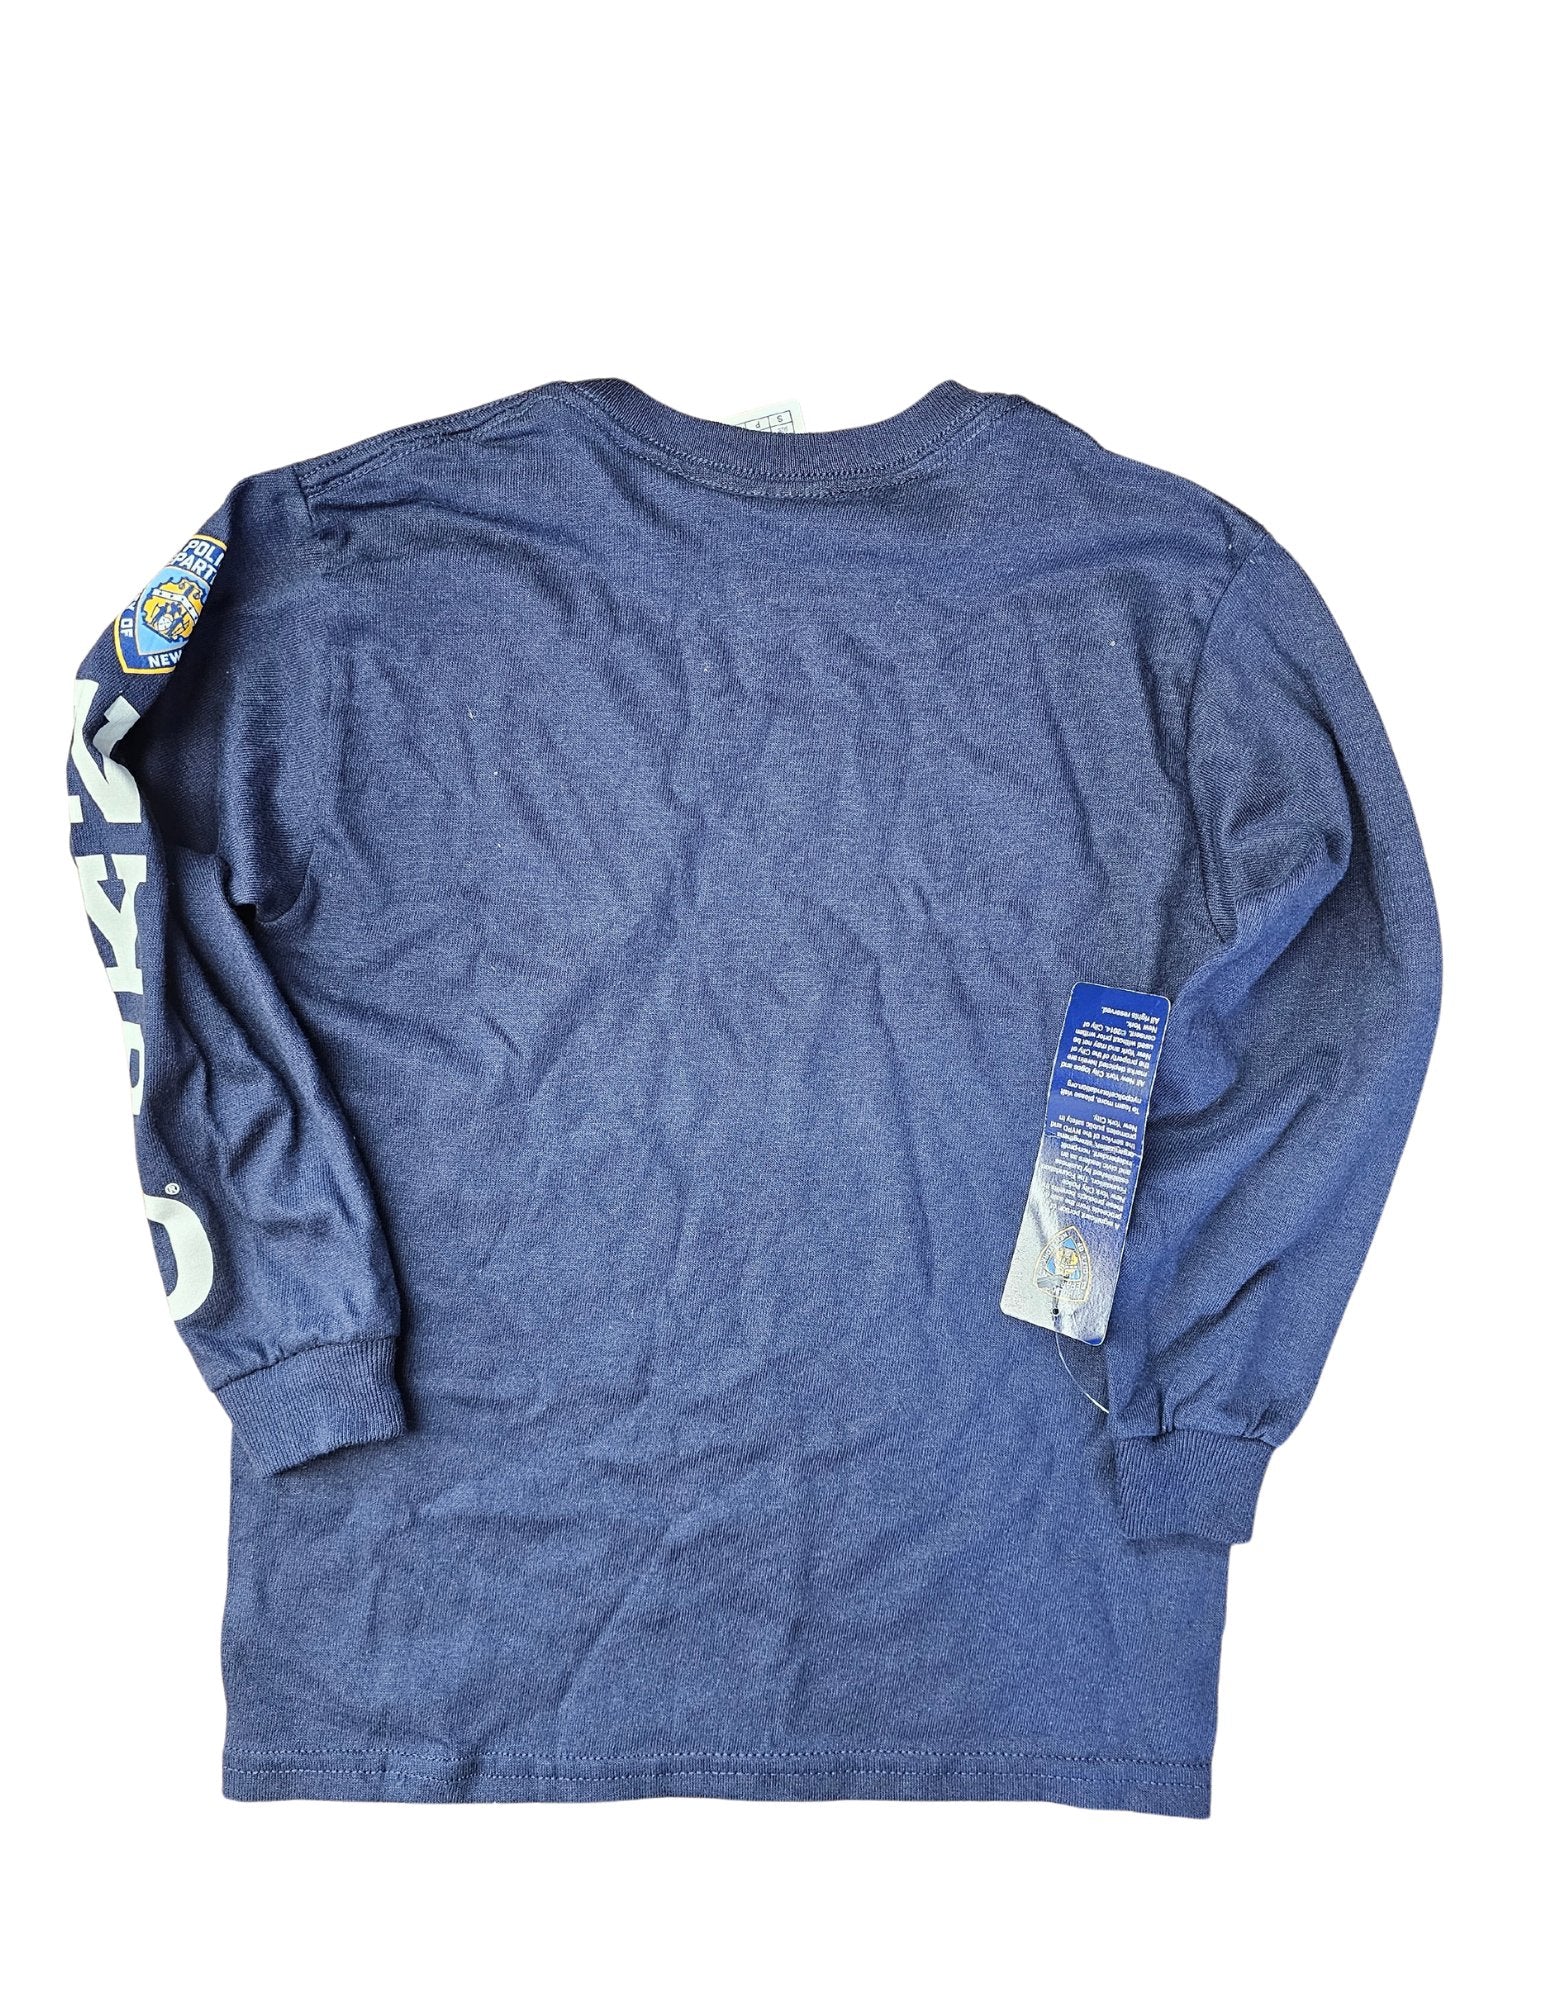 NYPD Kids Long Sleeve T-Shirt (Navy White, Chest & Sleeve Print)